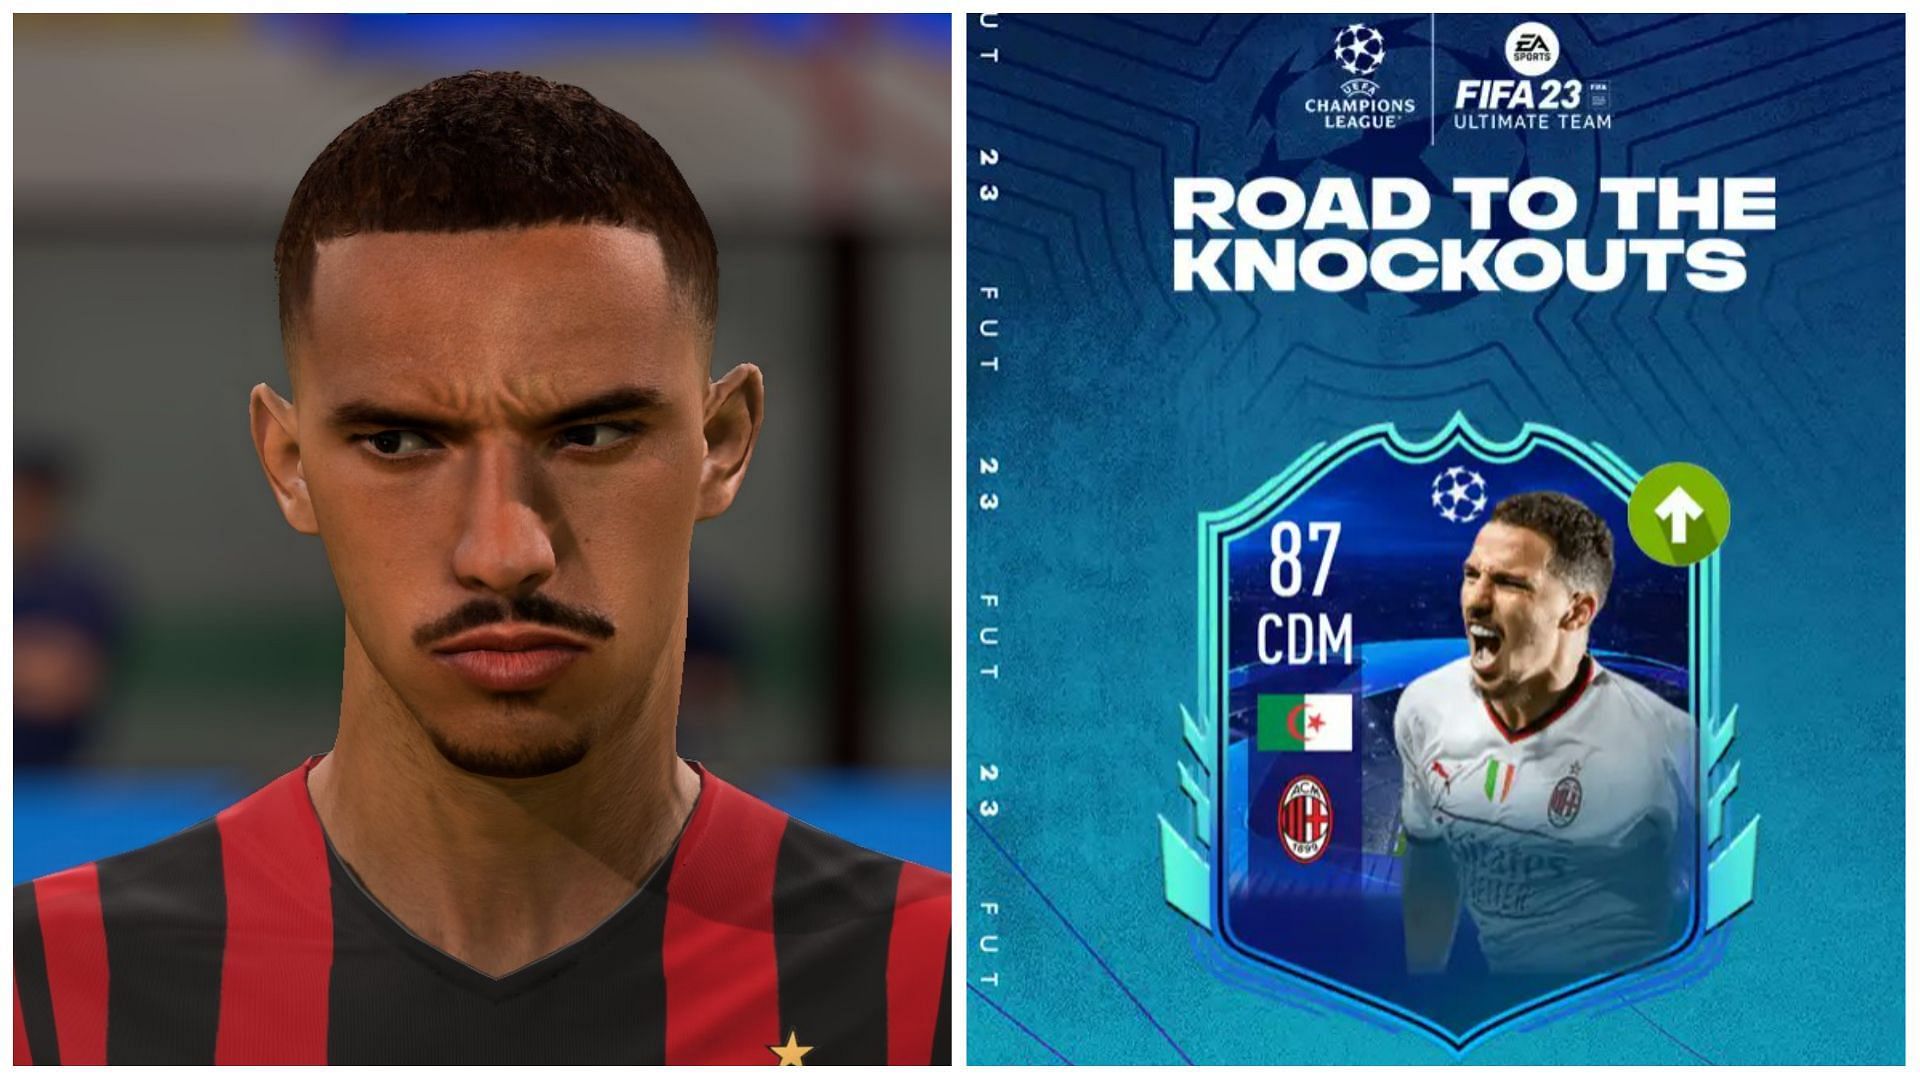 RTTK Bennacer is getting an upgrade in FIFA 23 (Images via EA Sports and Twitter/FIFAUTeam)